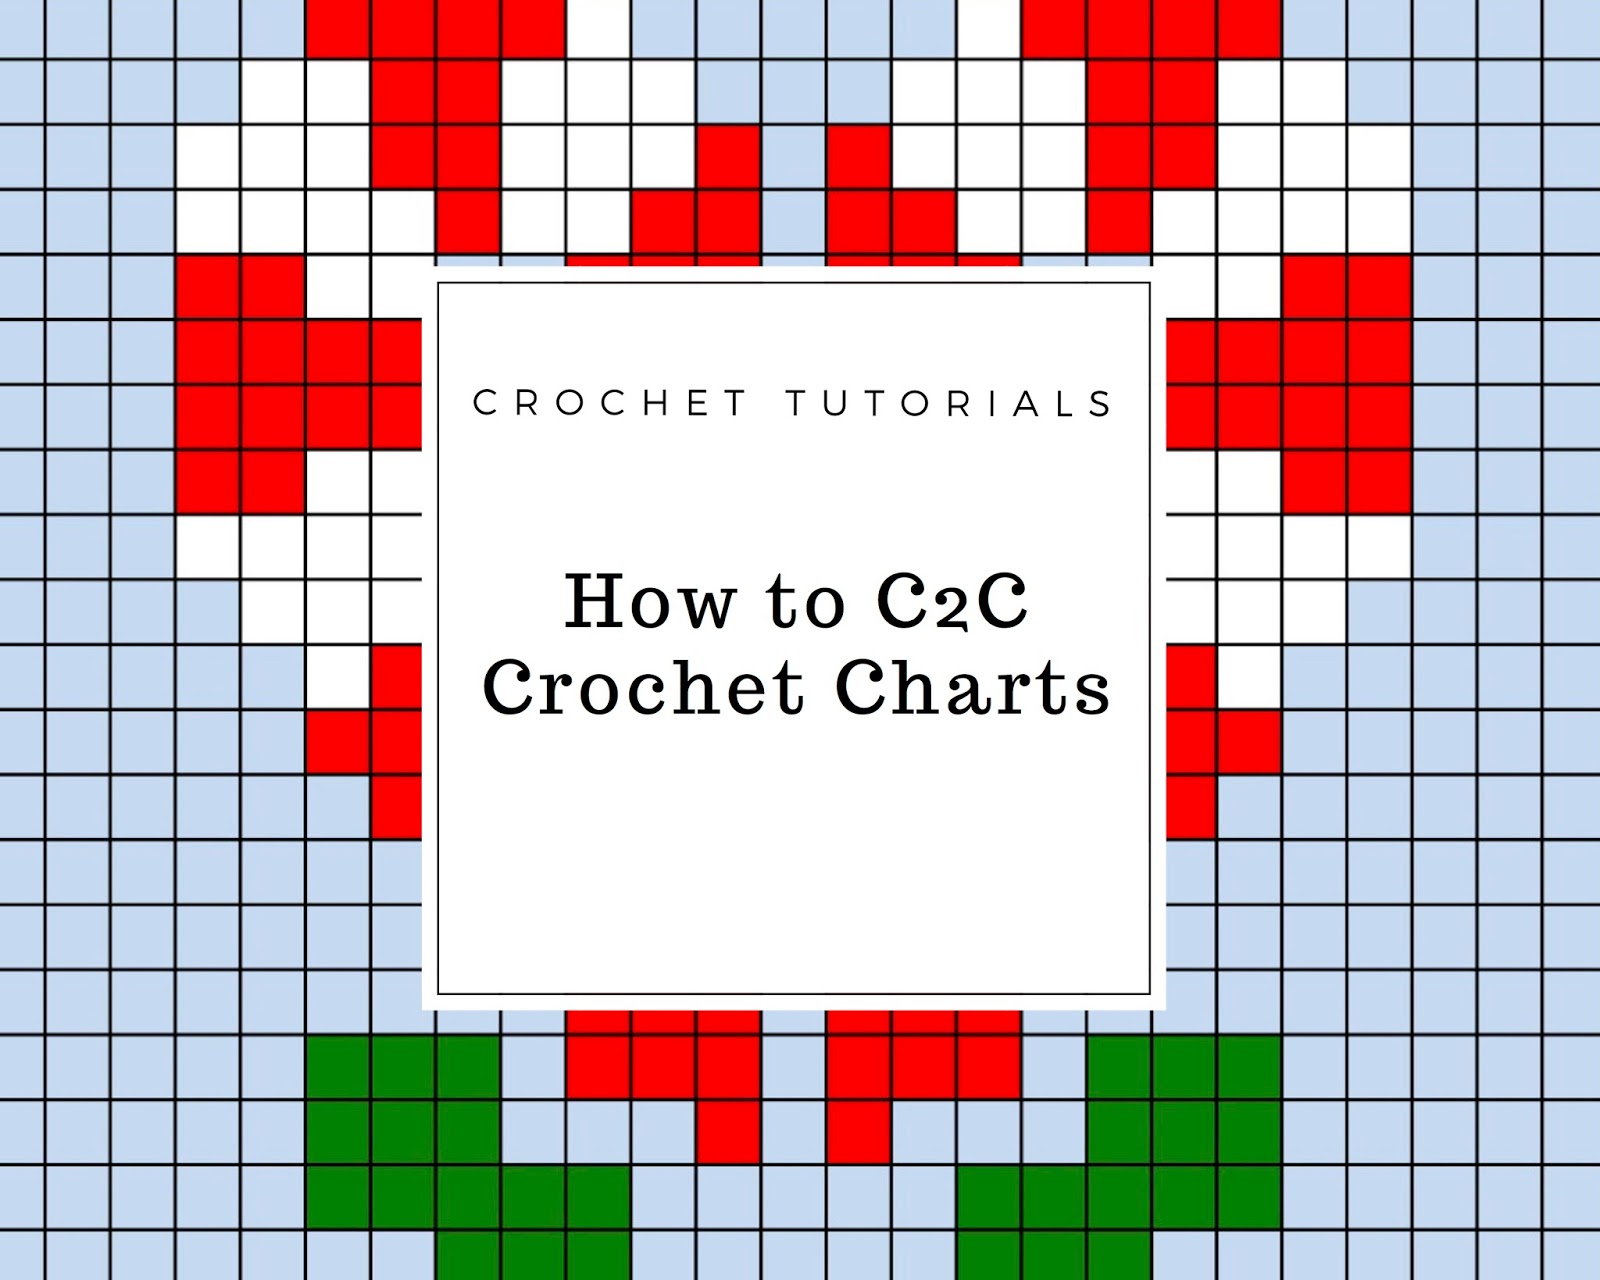 How to C2C Crochet Charts The Crafty Co The Crafty Co